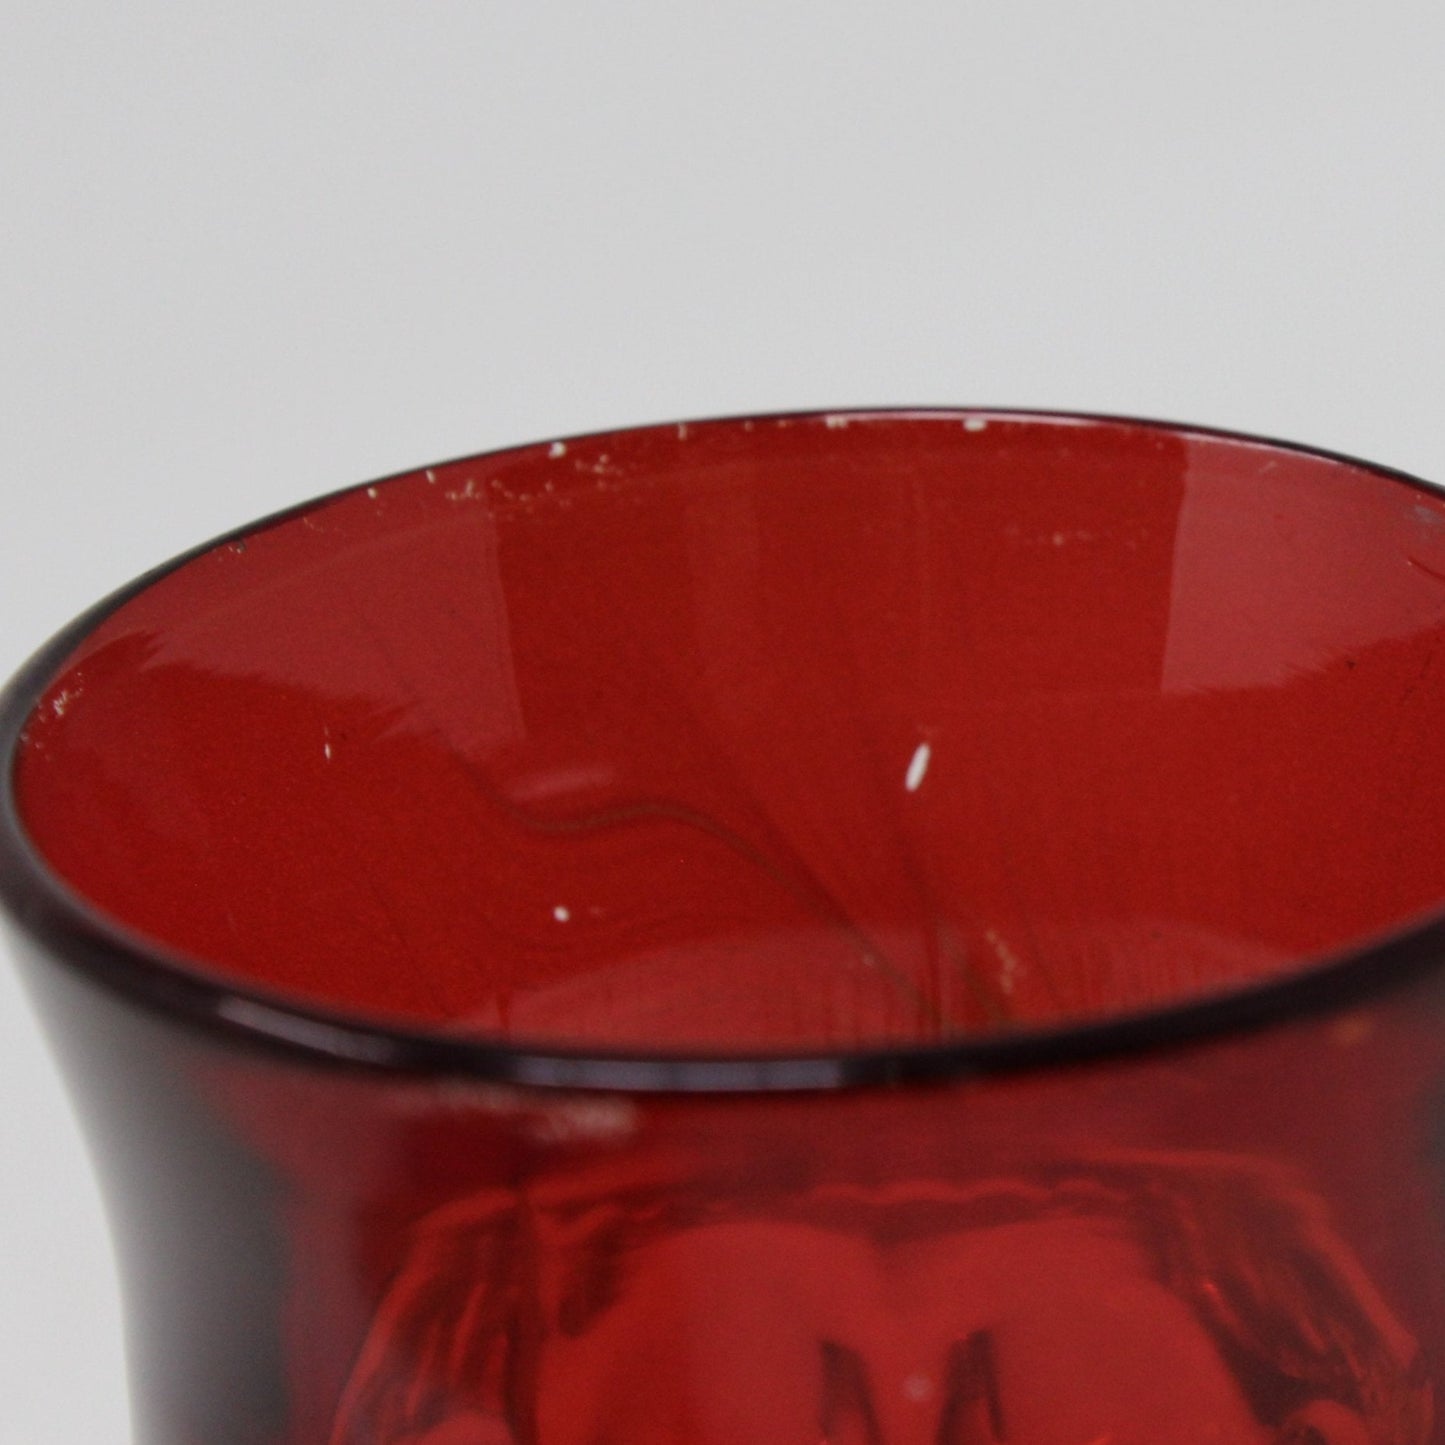 Cordial, Adams Glass, King's Crown (Thumbprint) Ruby-Flashed, Antique